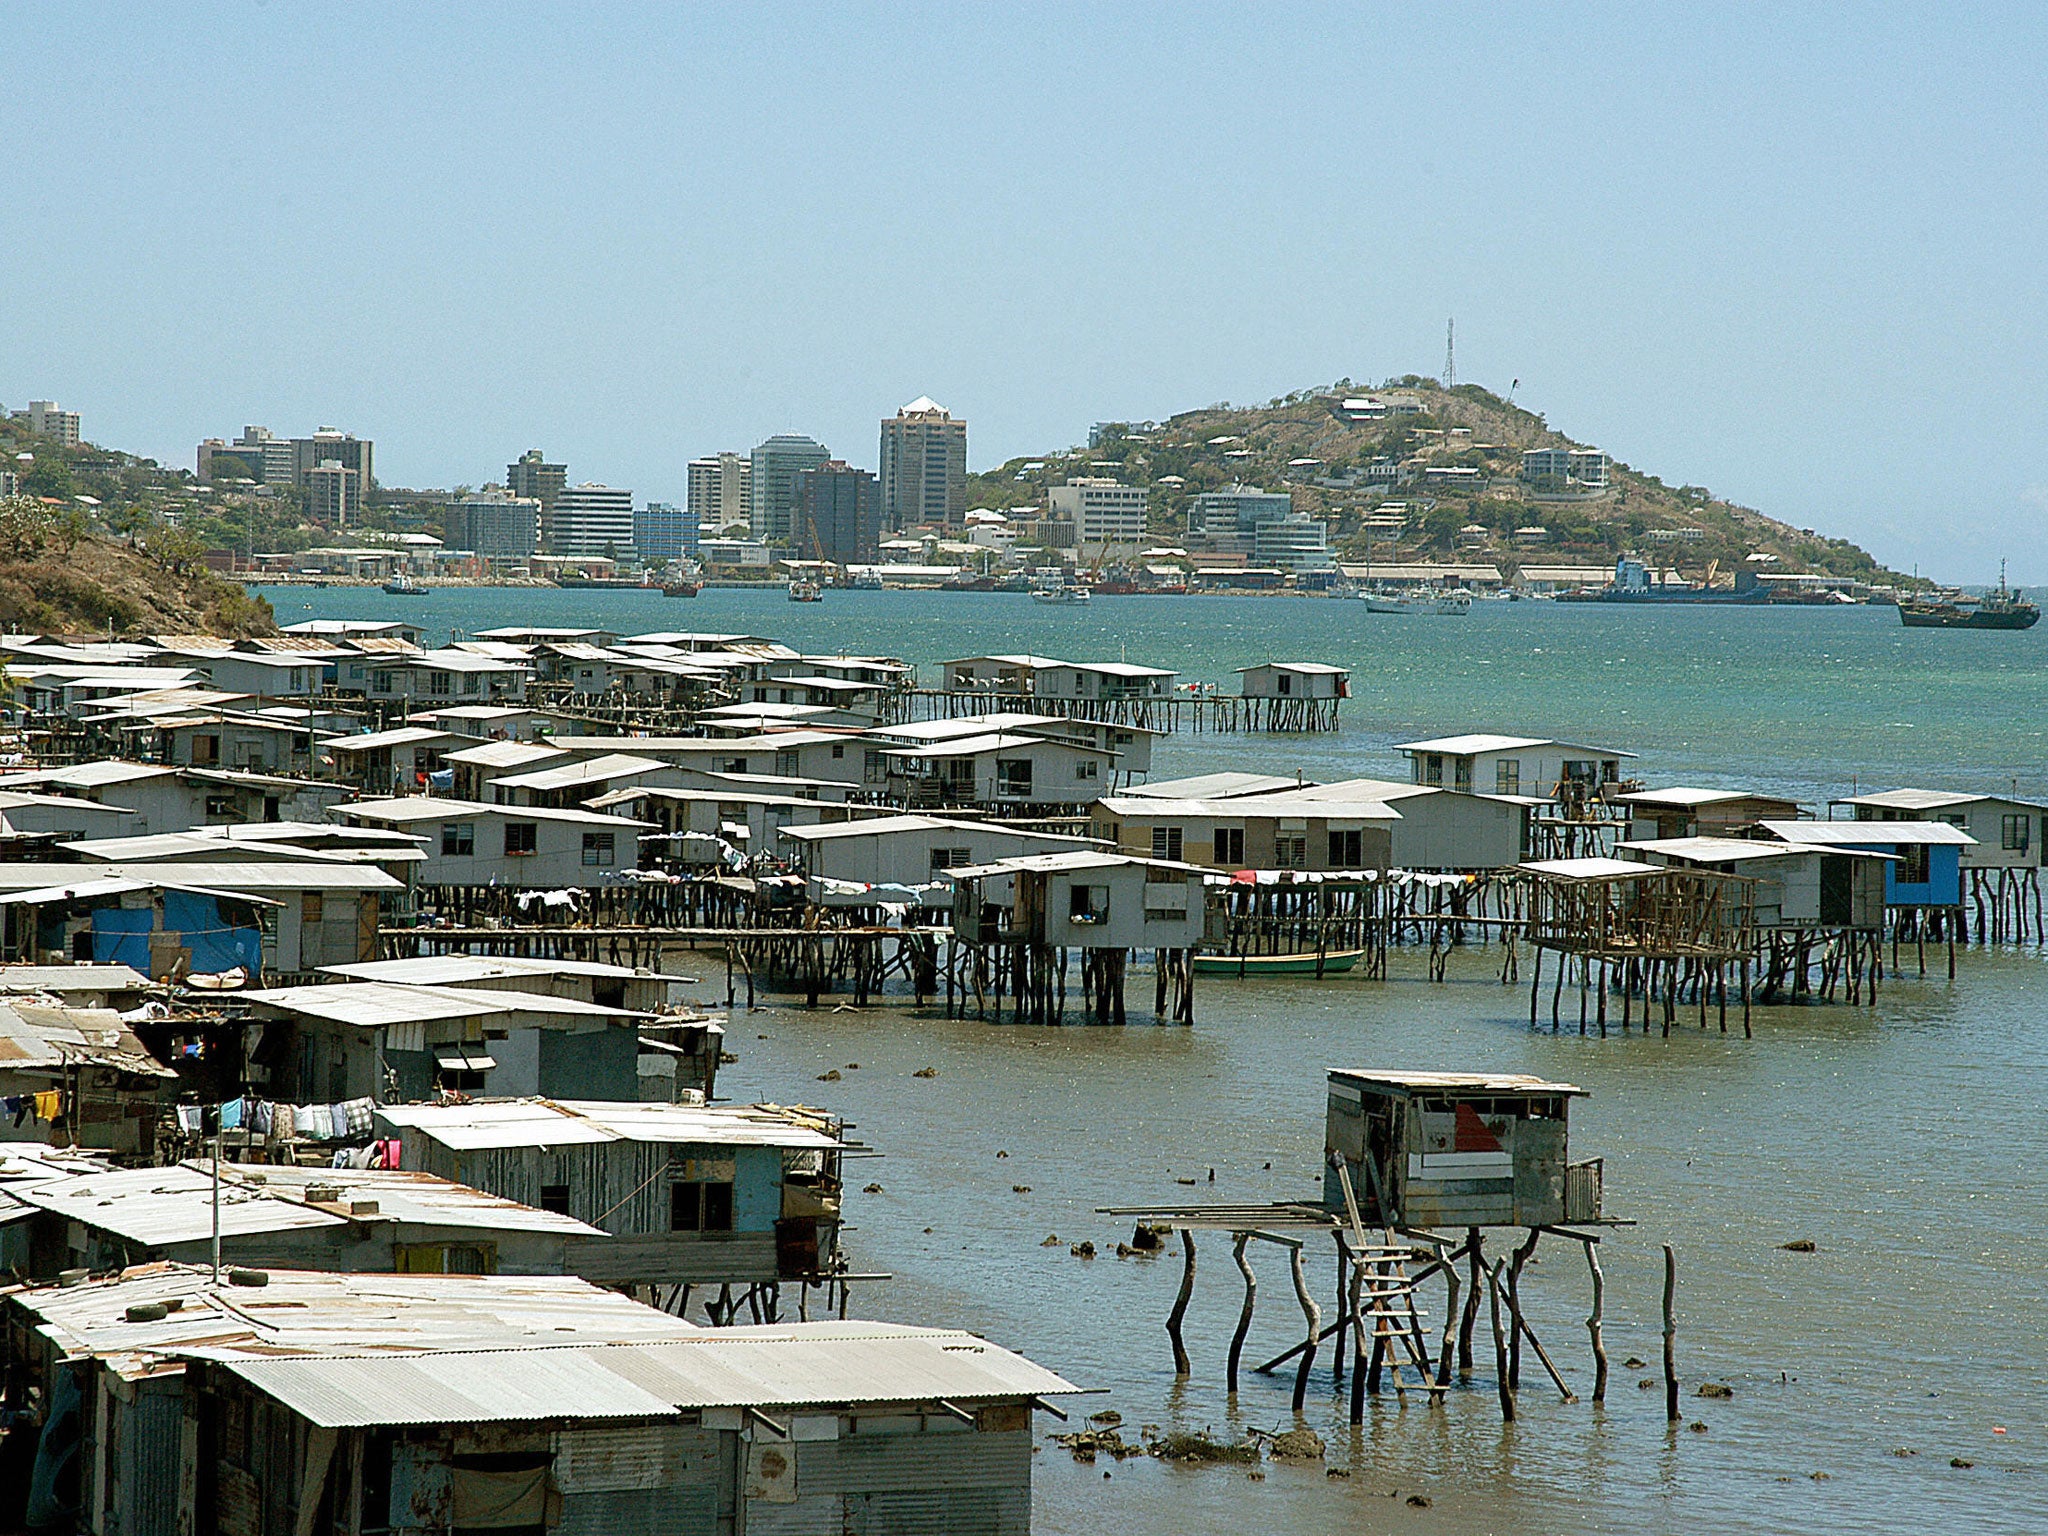 Port Moresby, the down-at-heel capital of Papua New Guinea.